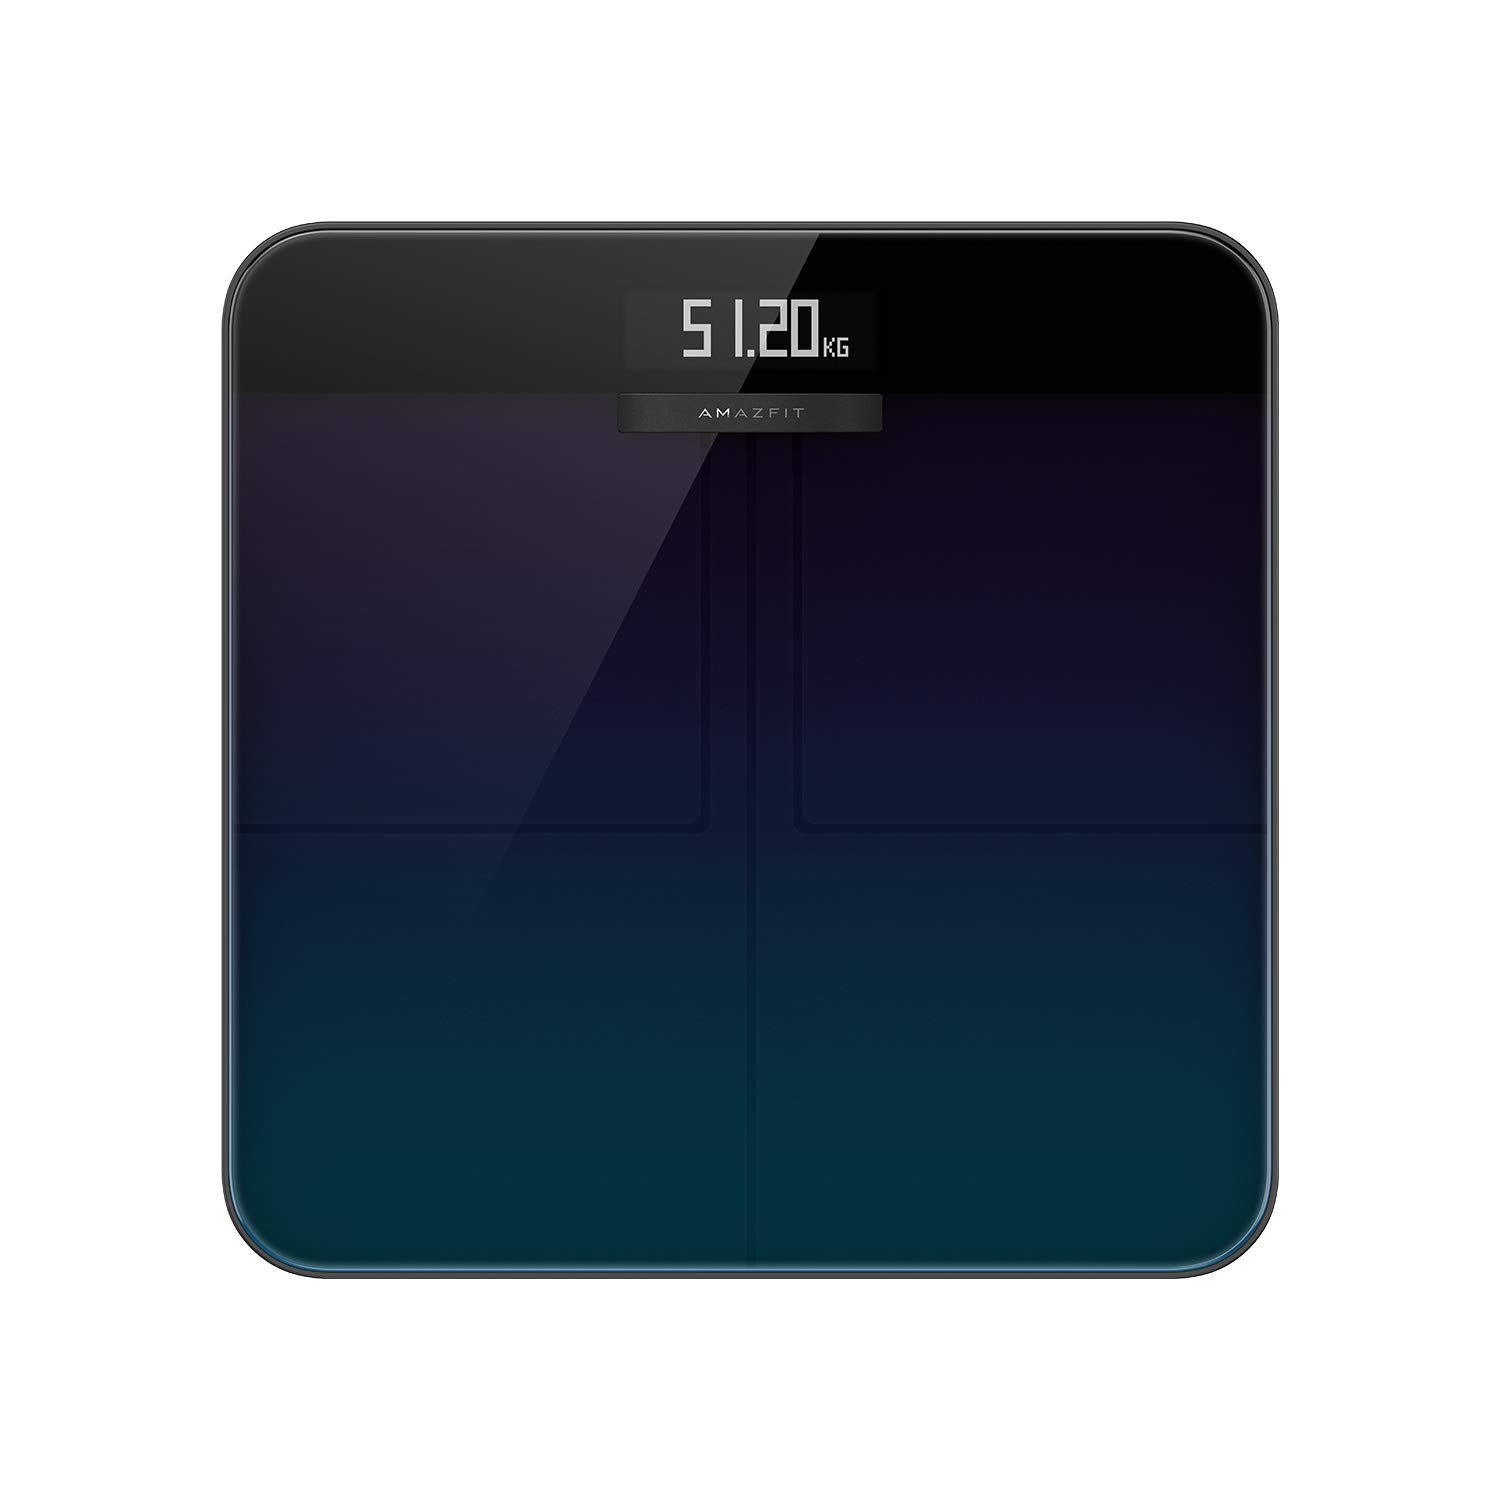 Amazfit Digital Smart Scale for Body Weight, Digital Wireless Bathroom Scale, Body Fat BMI Scale, WiFi & Bluetooth Compatible, Heart Rate Monitor, w/Body Composition Analyzer & Smartphone App - Black